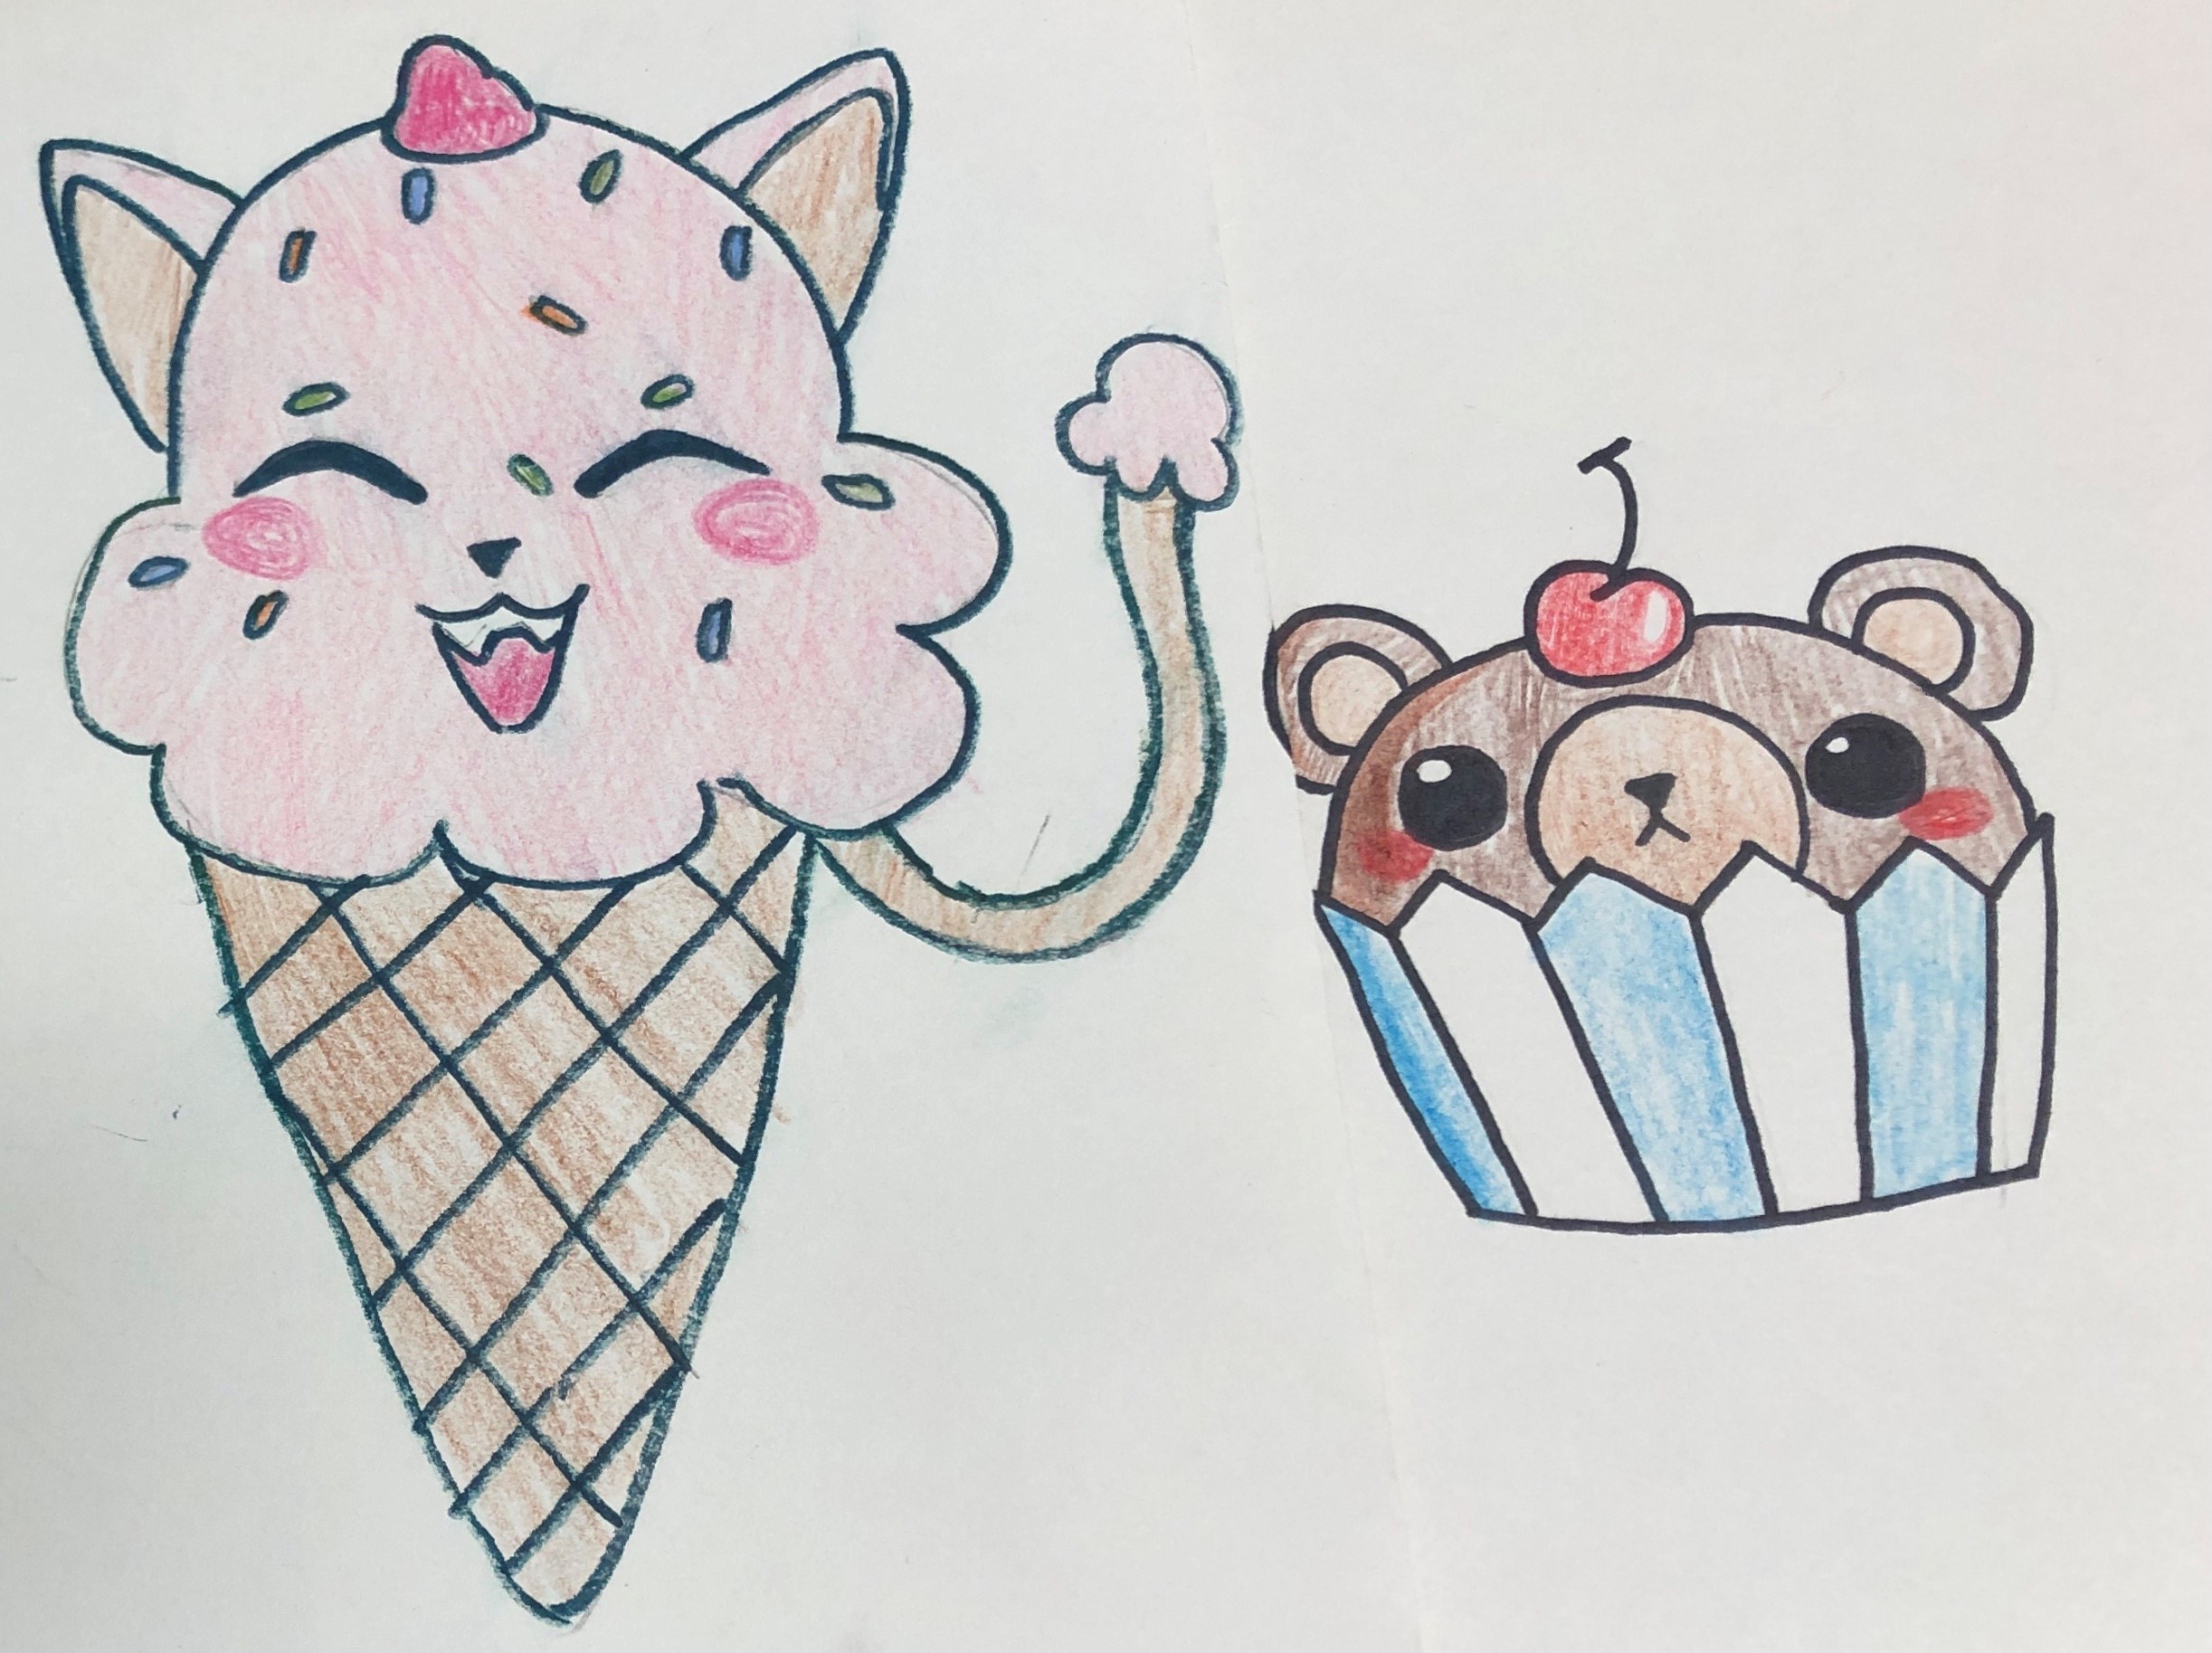 cupcake and ice cream cone with animal ears and faces